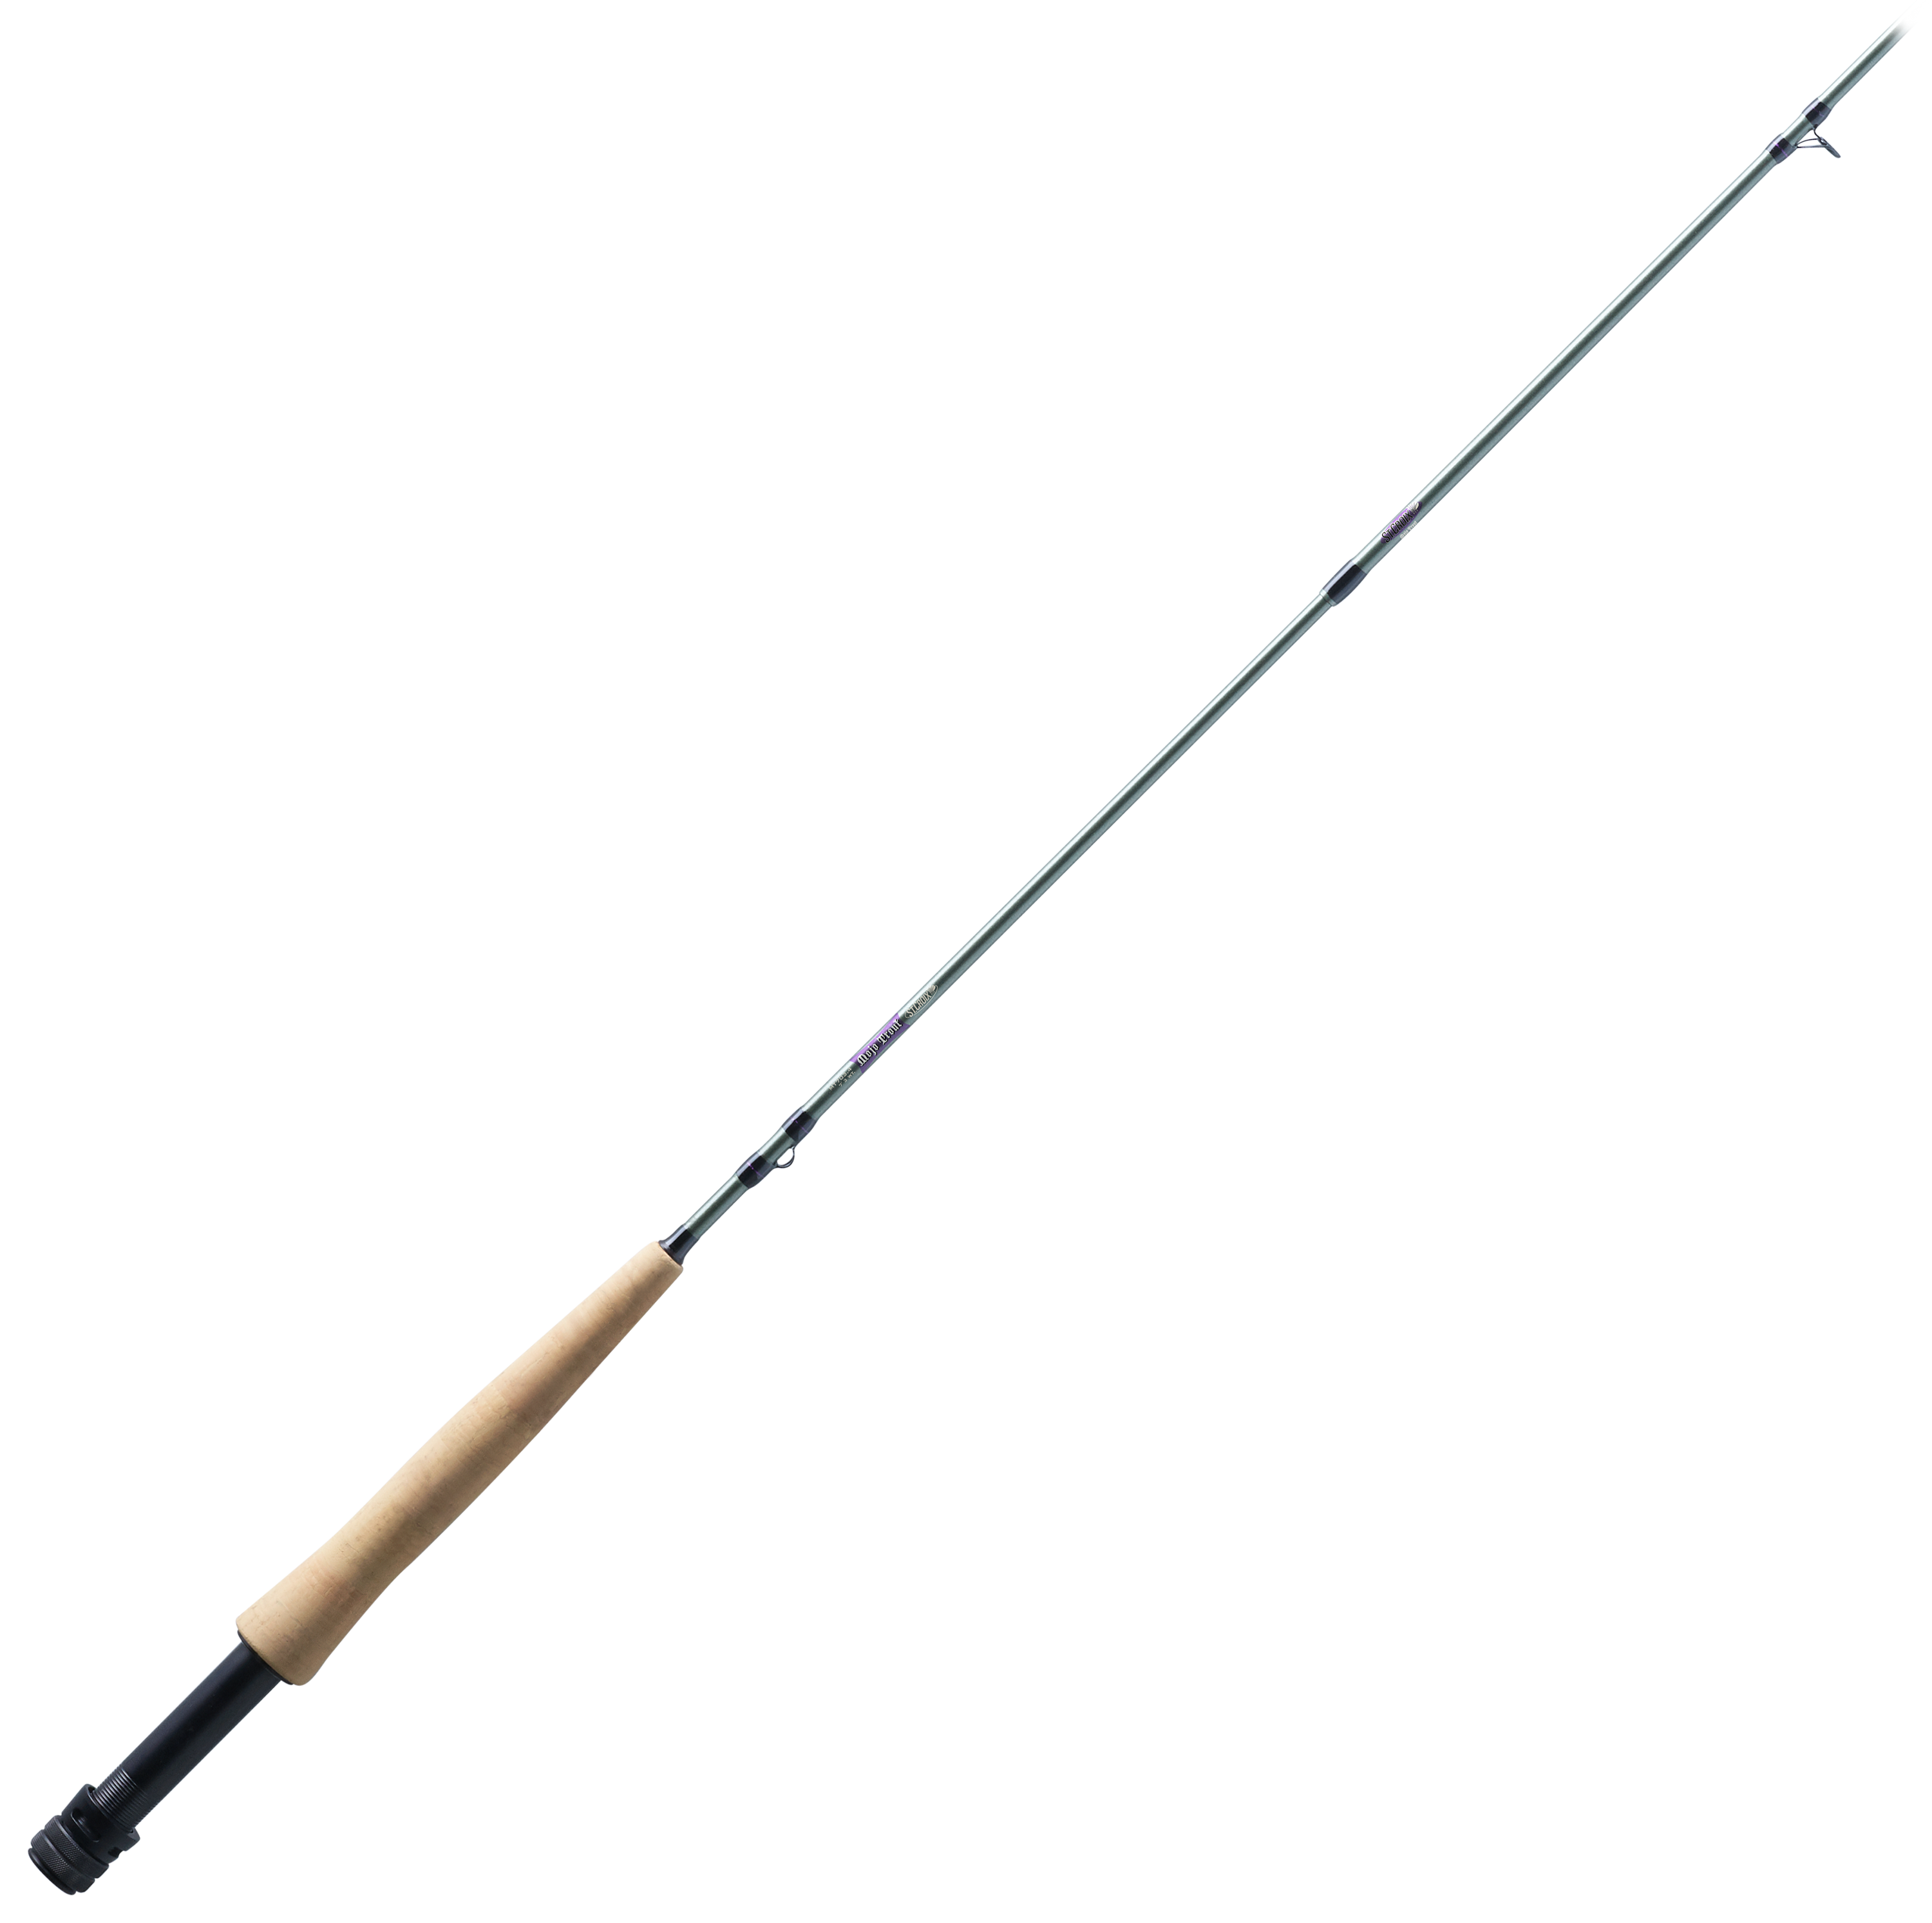 St. Croix Mojo Trout Fly Rod - MT703.4